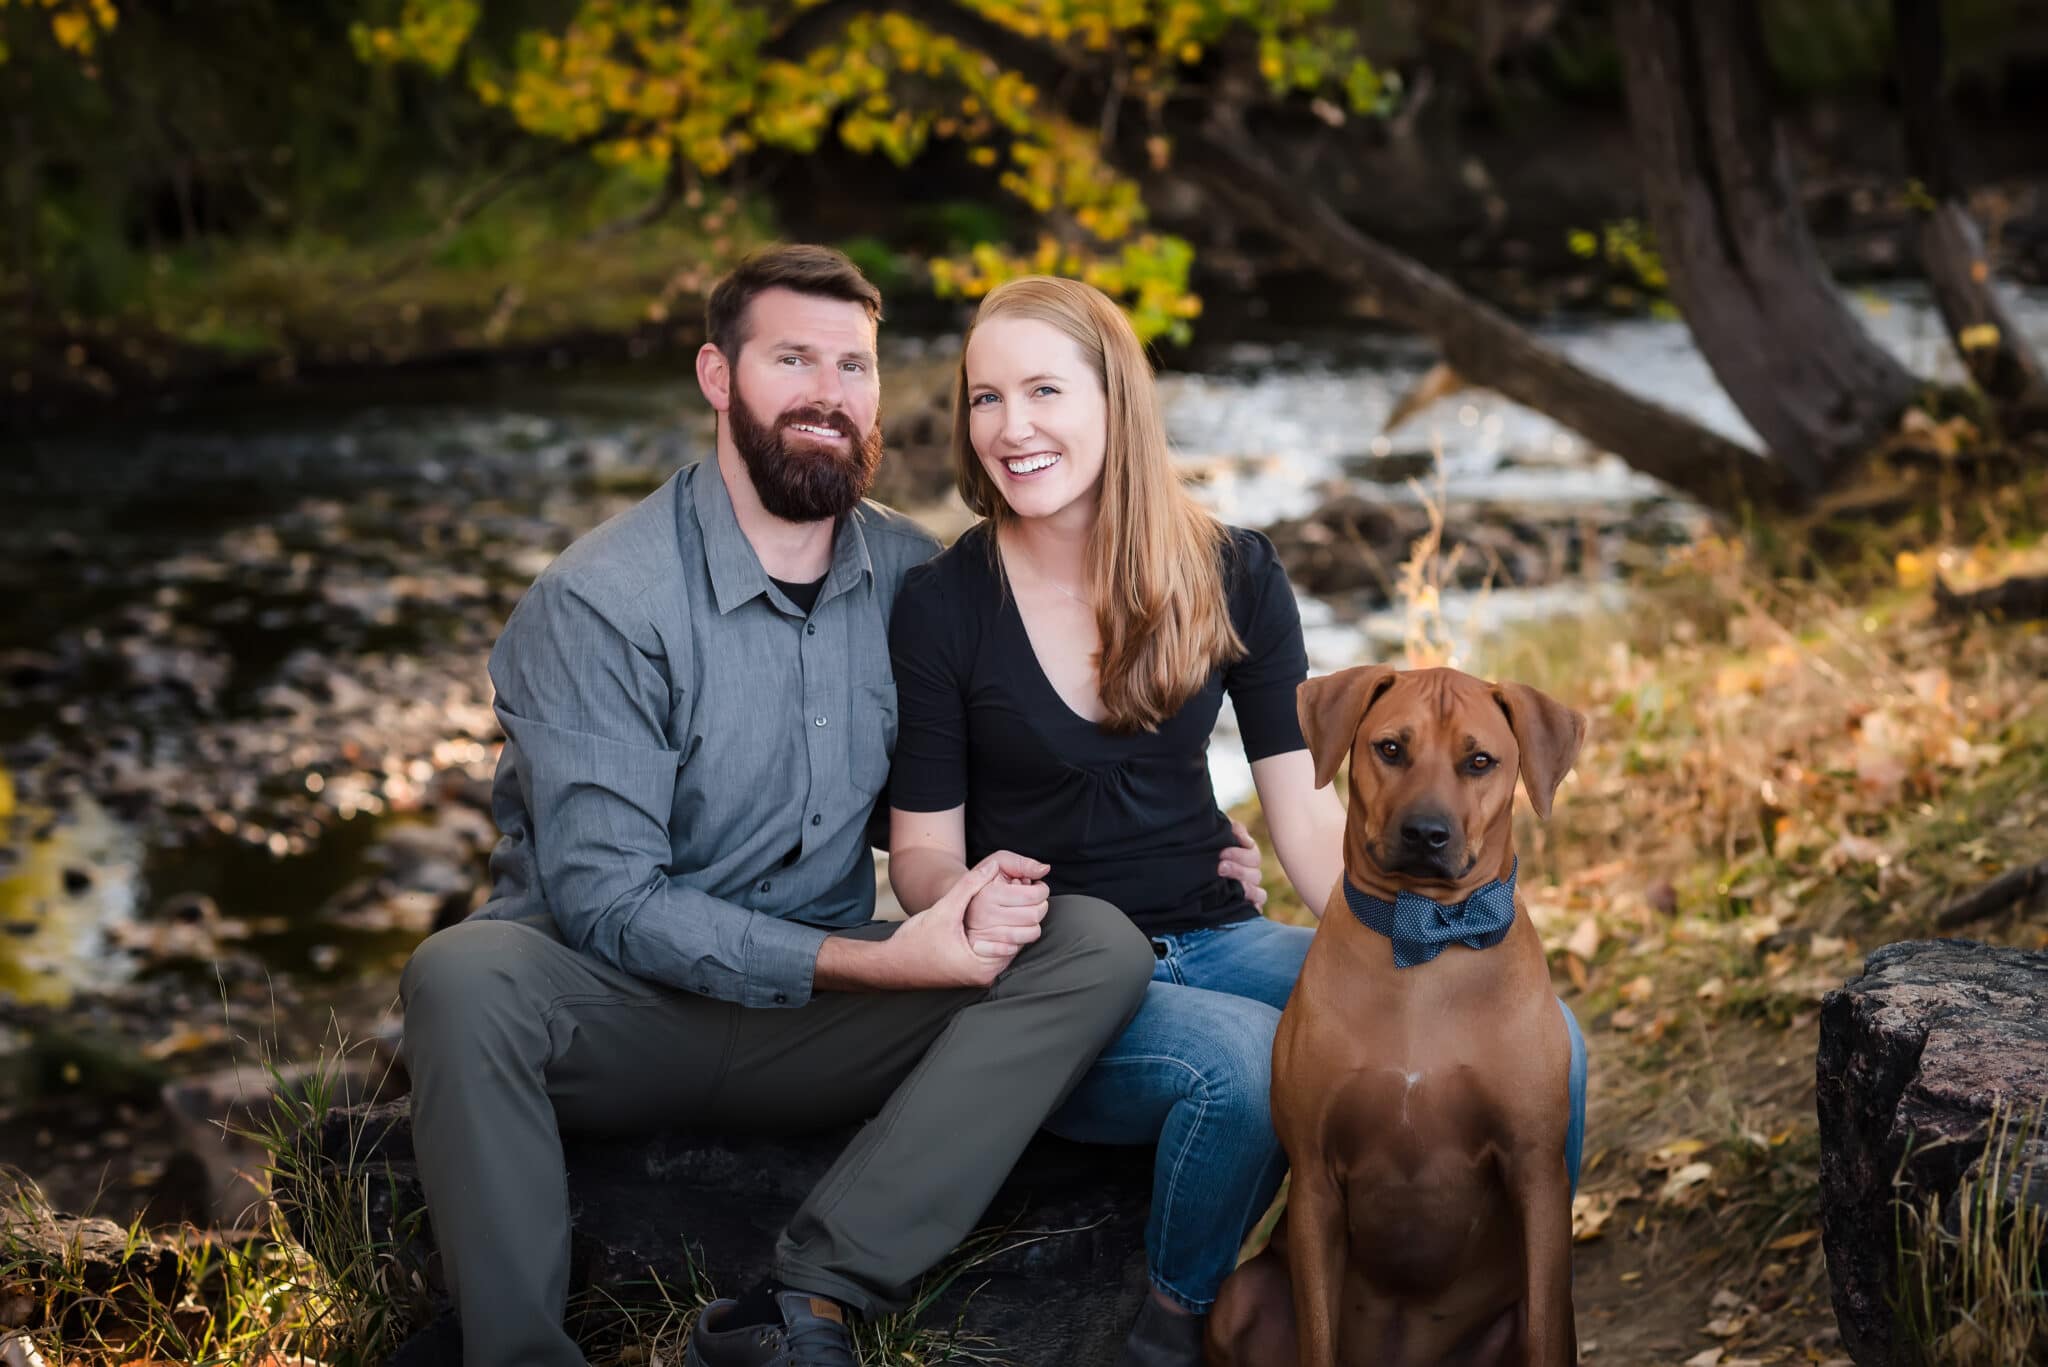 An engaged couple sitting on a rock hold hands during their engagement session as their dog looks on.